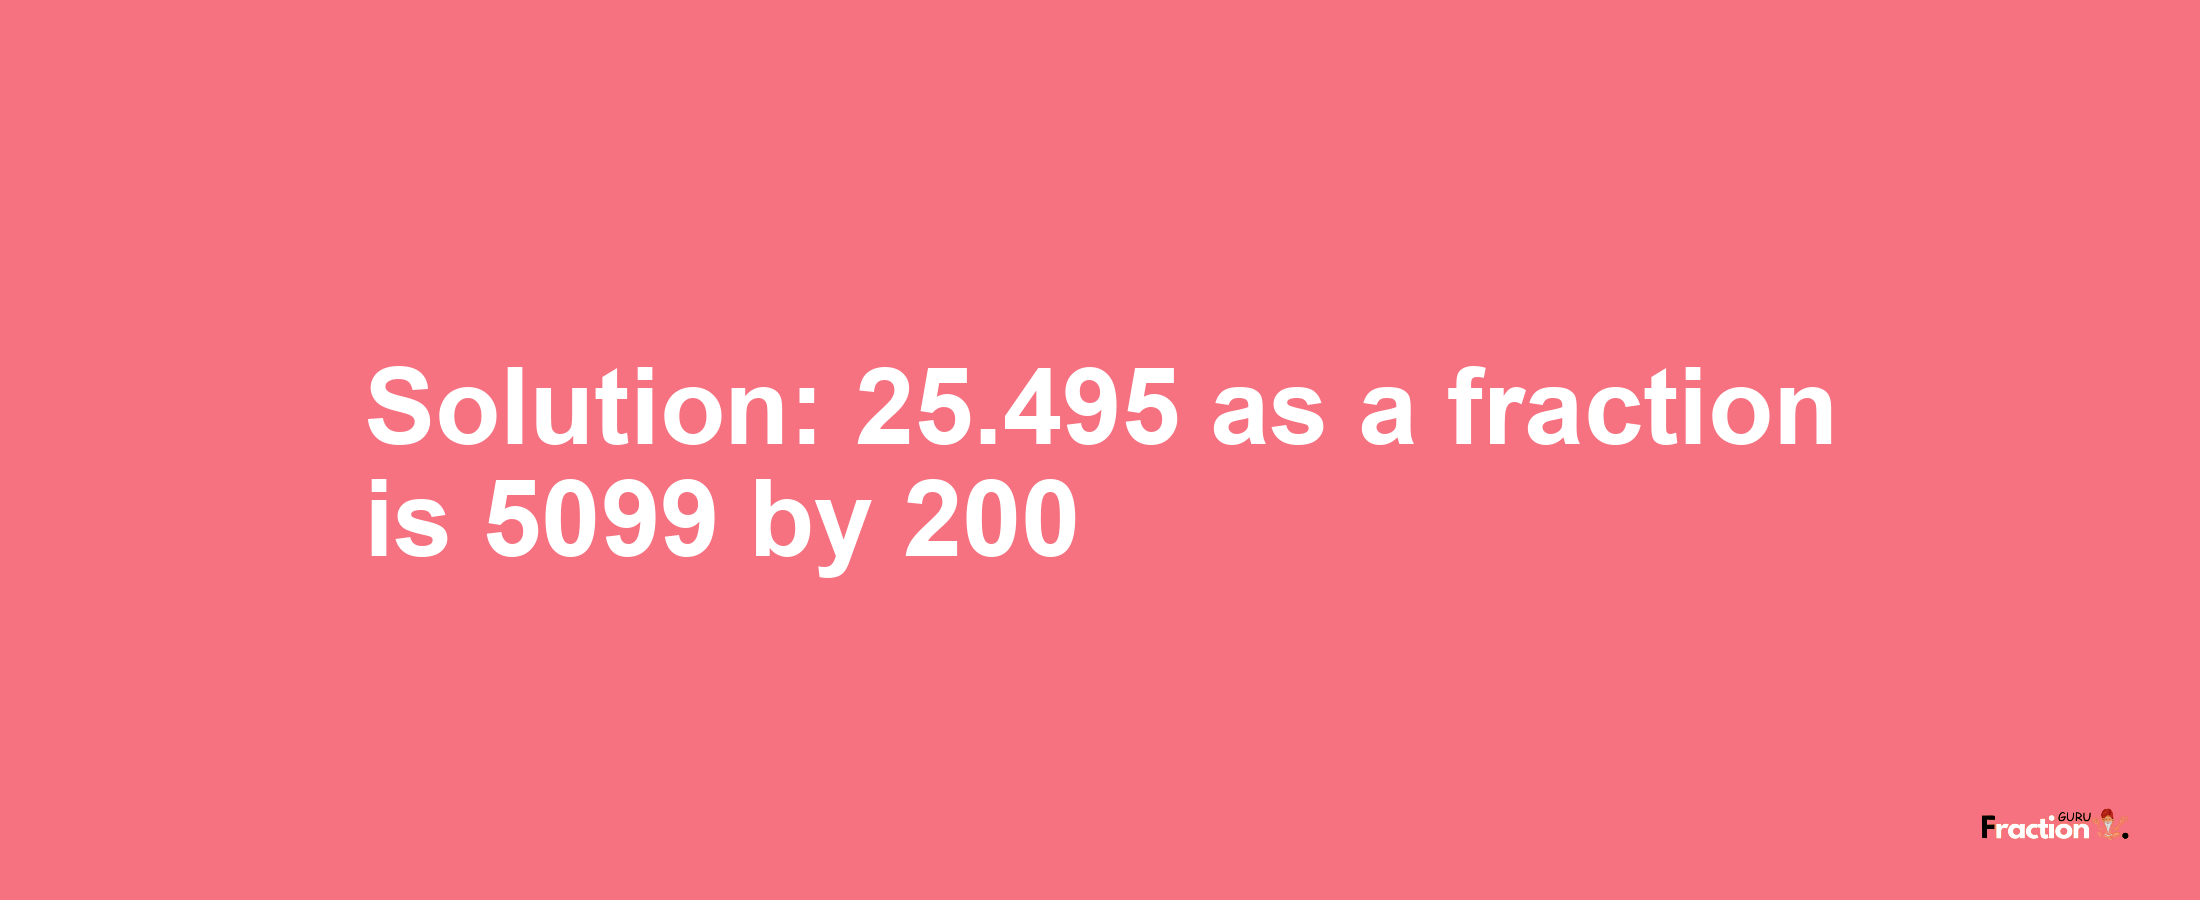 Solution:25.495 as a fraction is 5099/200